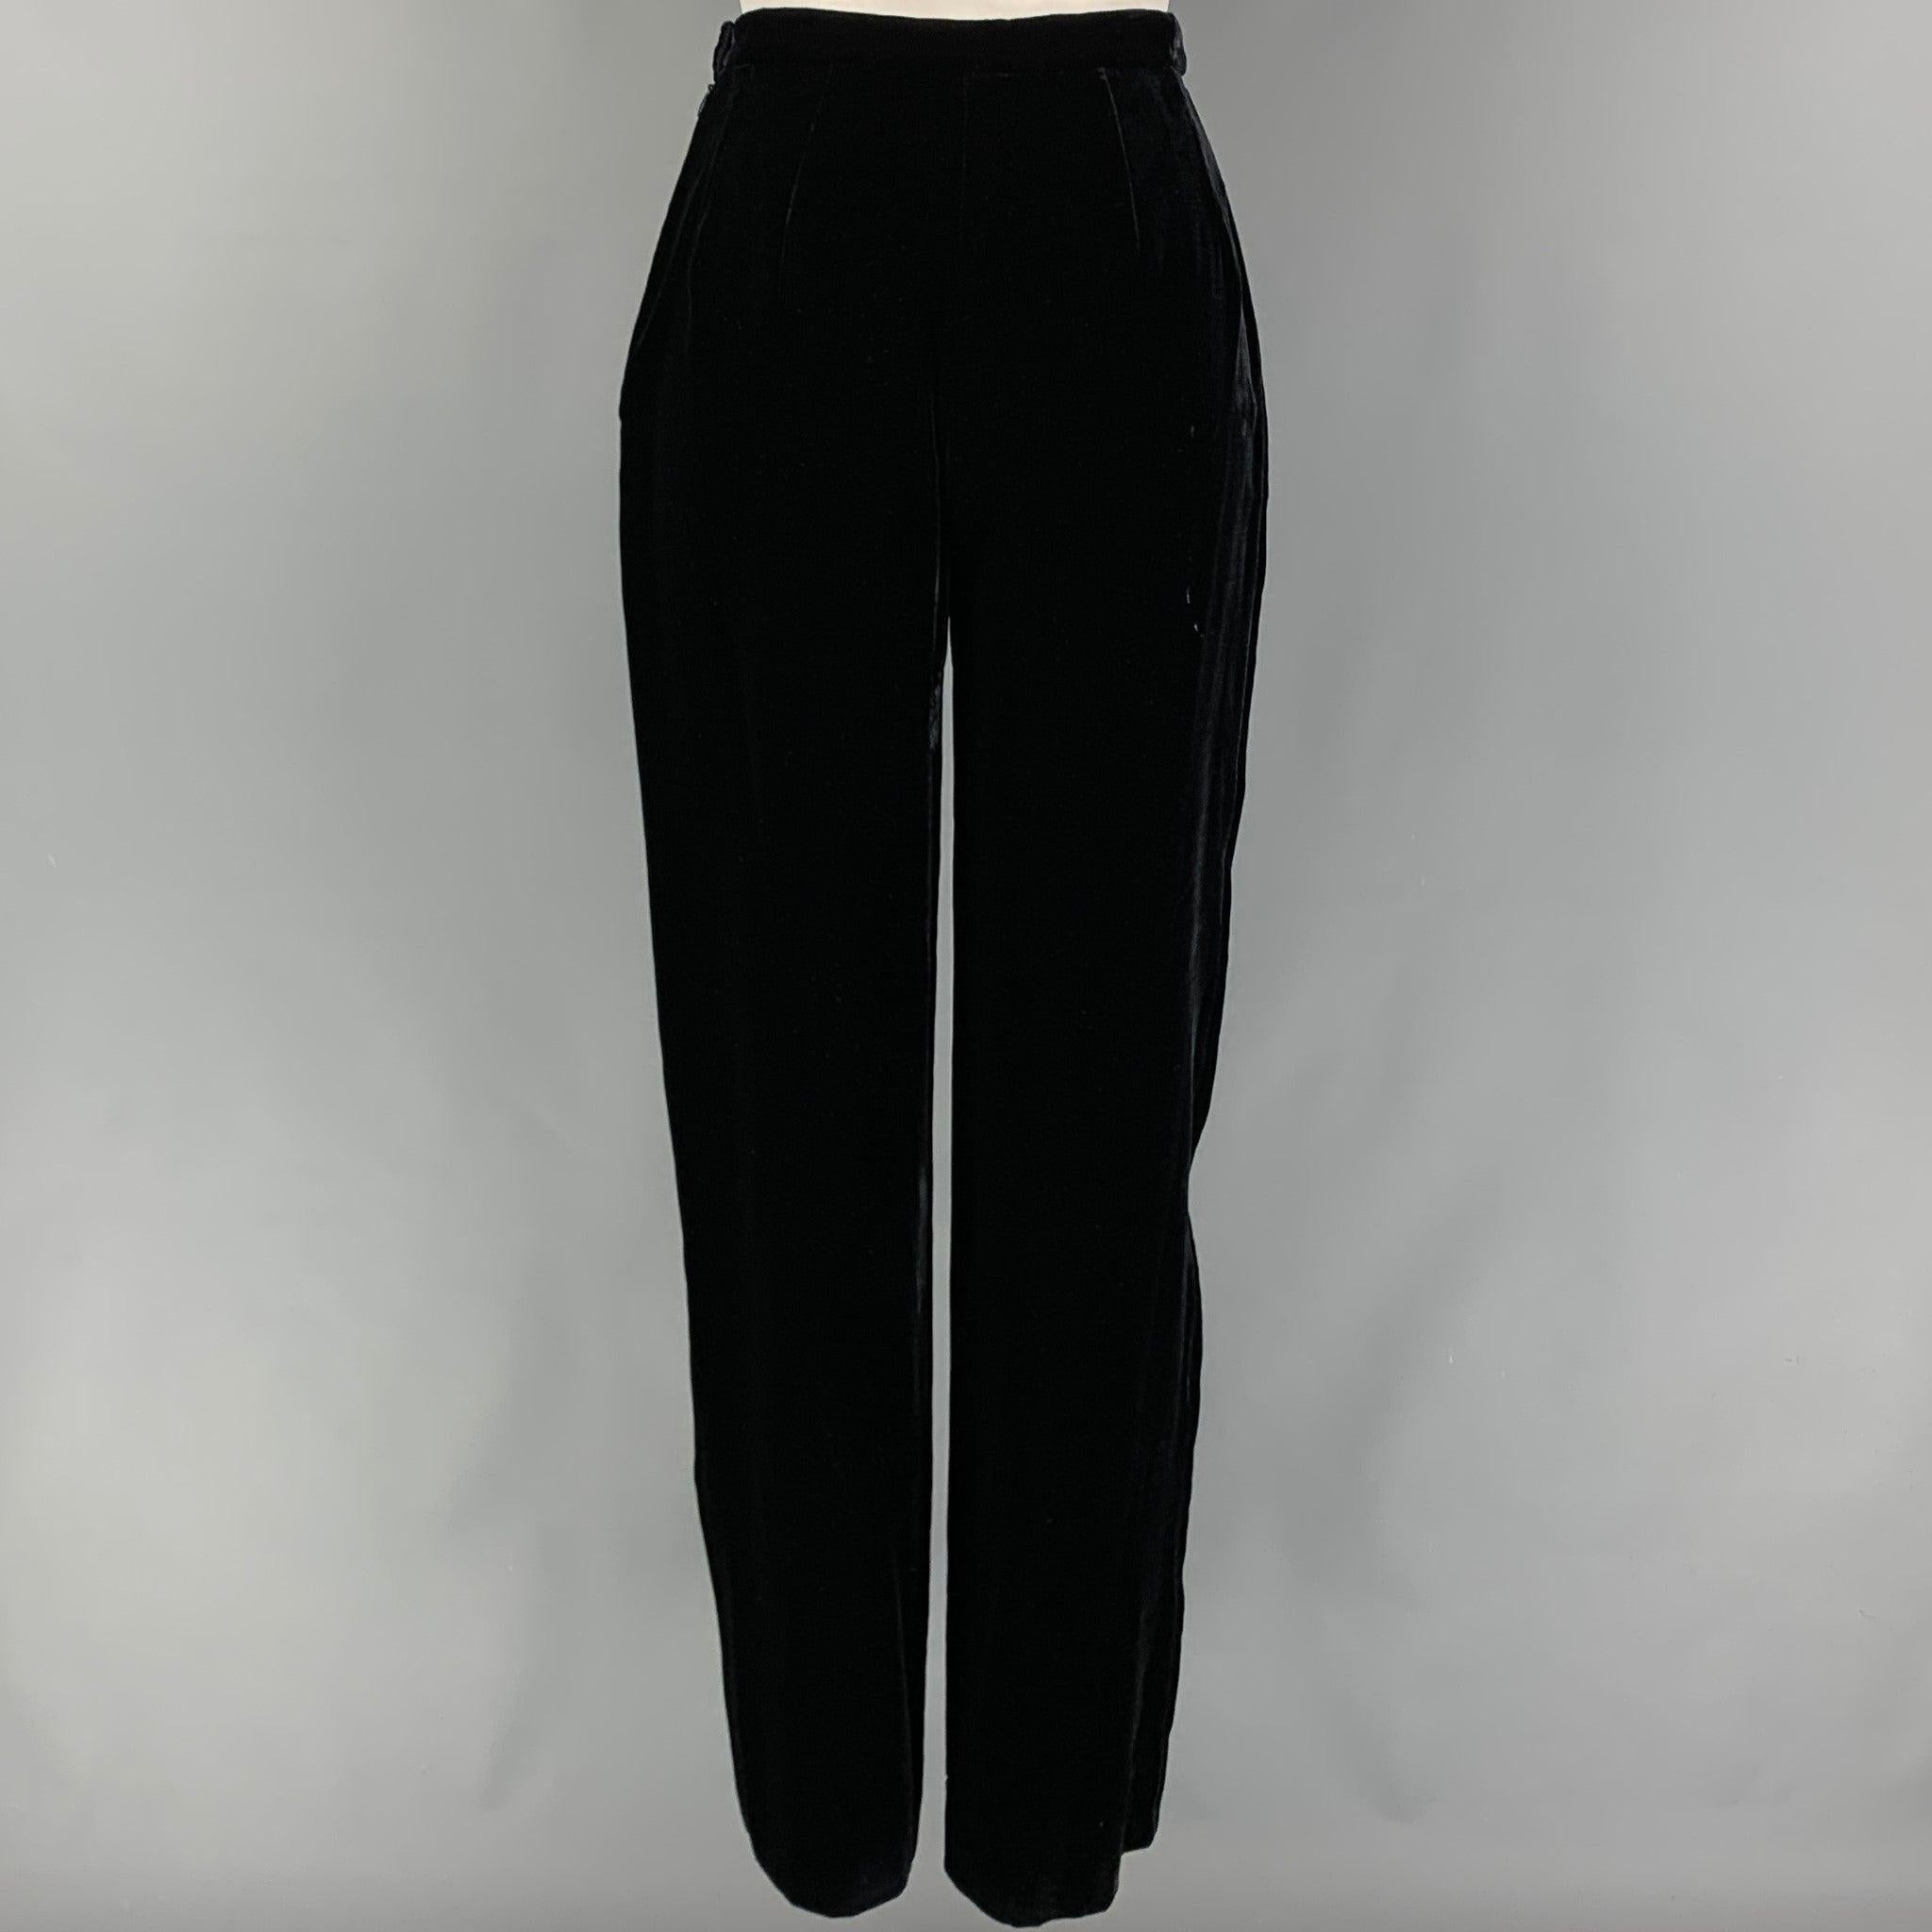 GIORGIO ARMANI pants comes in a black velvet viscose blend featuring a high waist, wide leg, and a side button & zipper closure. Made in Italy.
Very Good
Pre-Owned Condition. 

Marked:   38 

Measurements: 
  Waist: 24 inches  Rise: 11.5 inches 